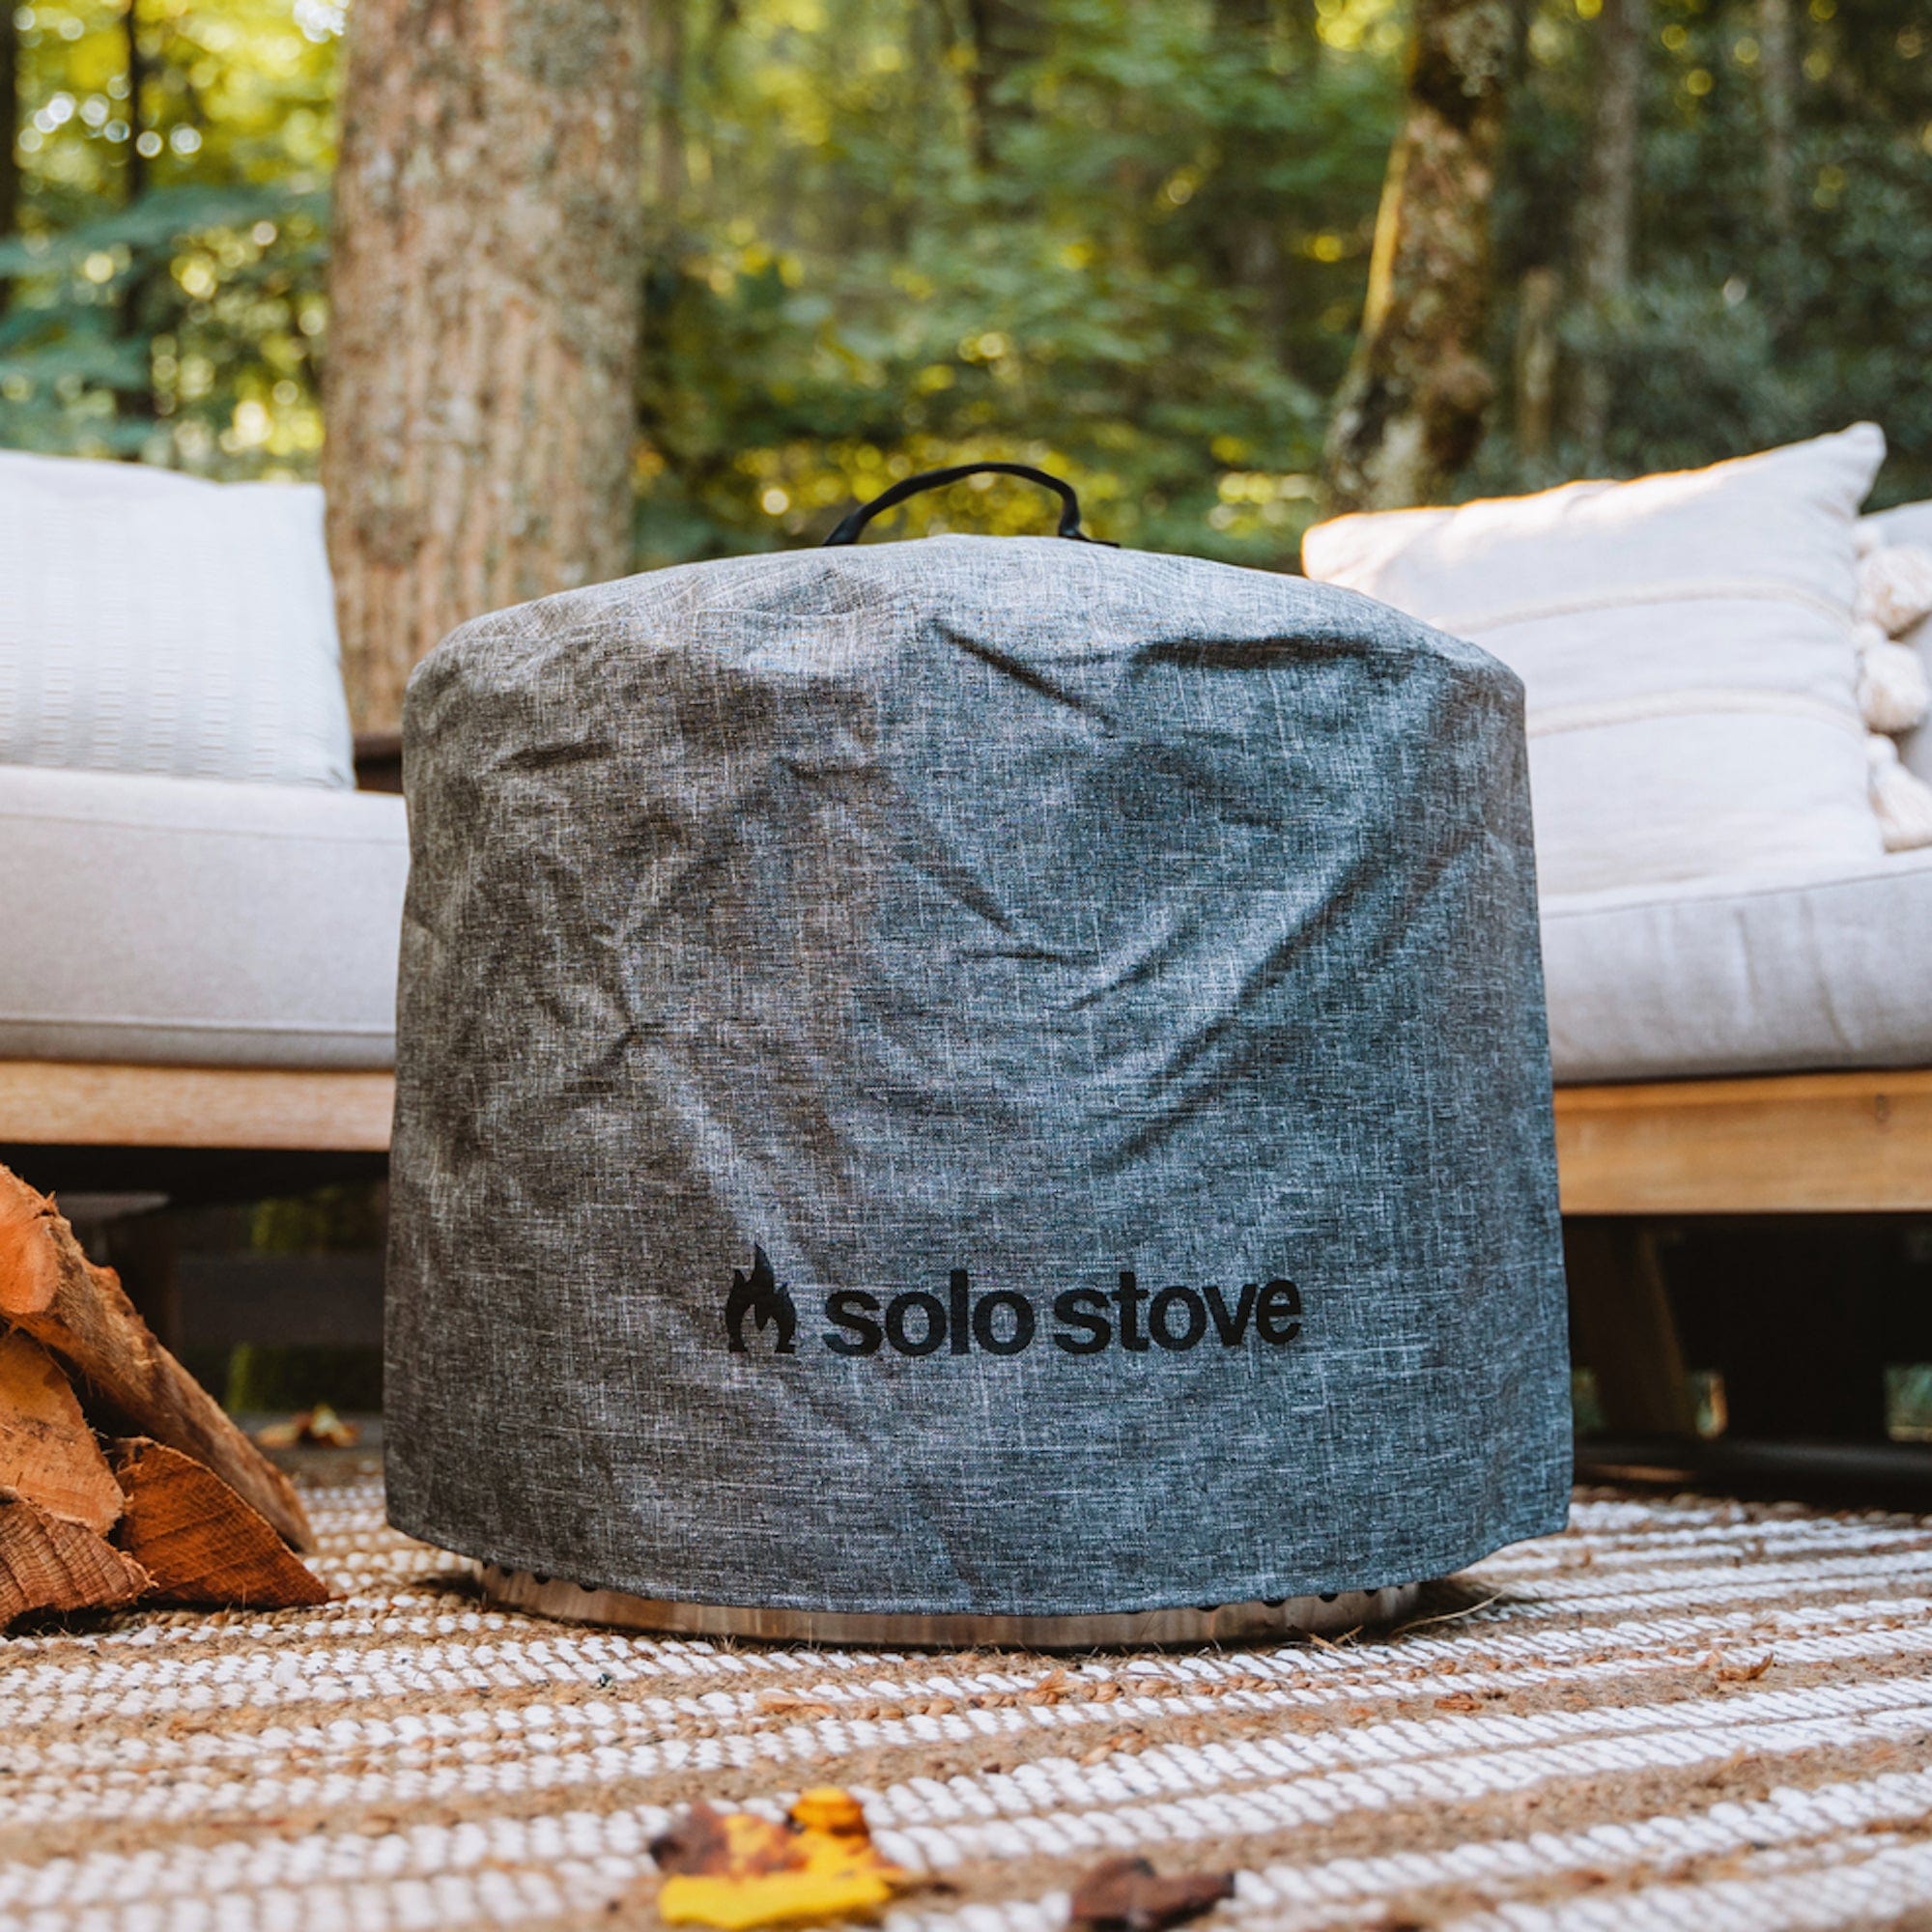 Solo Stove Fire Pit Bonfire + Stand + Shelter 2.0 by Solo Stove